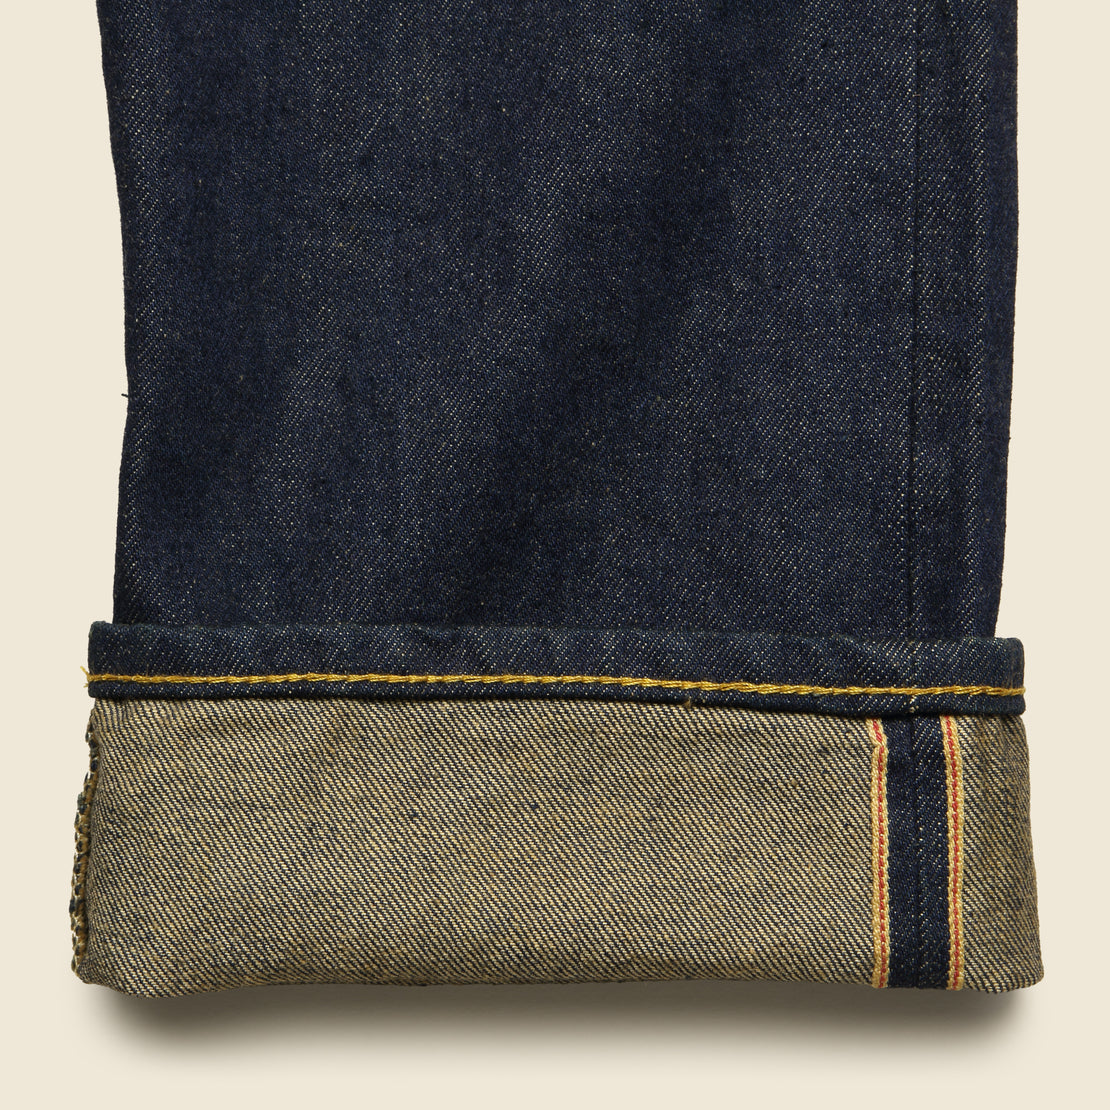 Slim Fit Jean - Once Washed - RRL - STAG Provisions - Pants - Denim